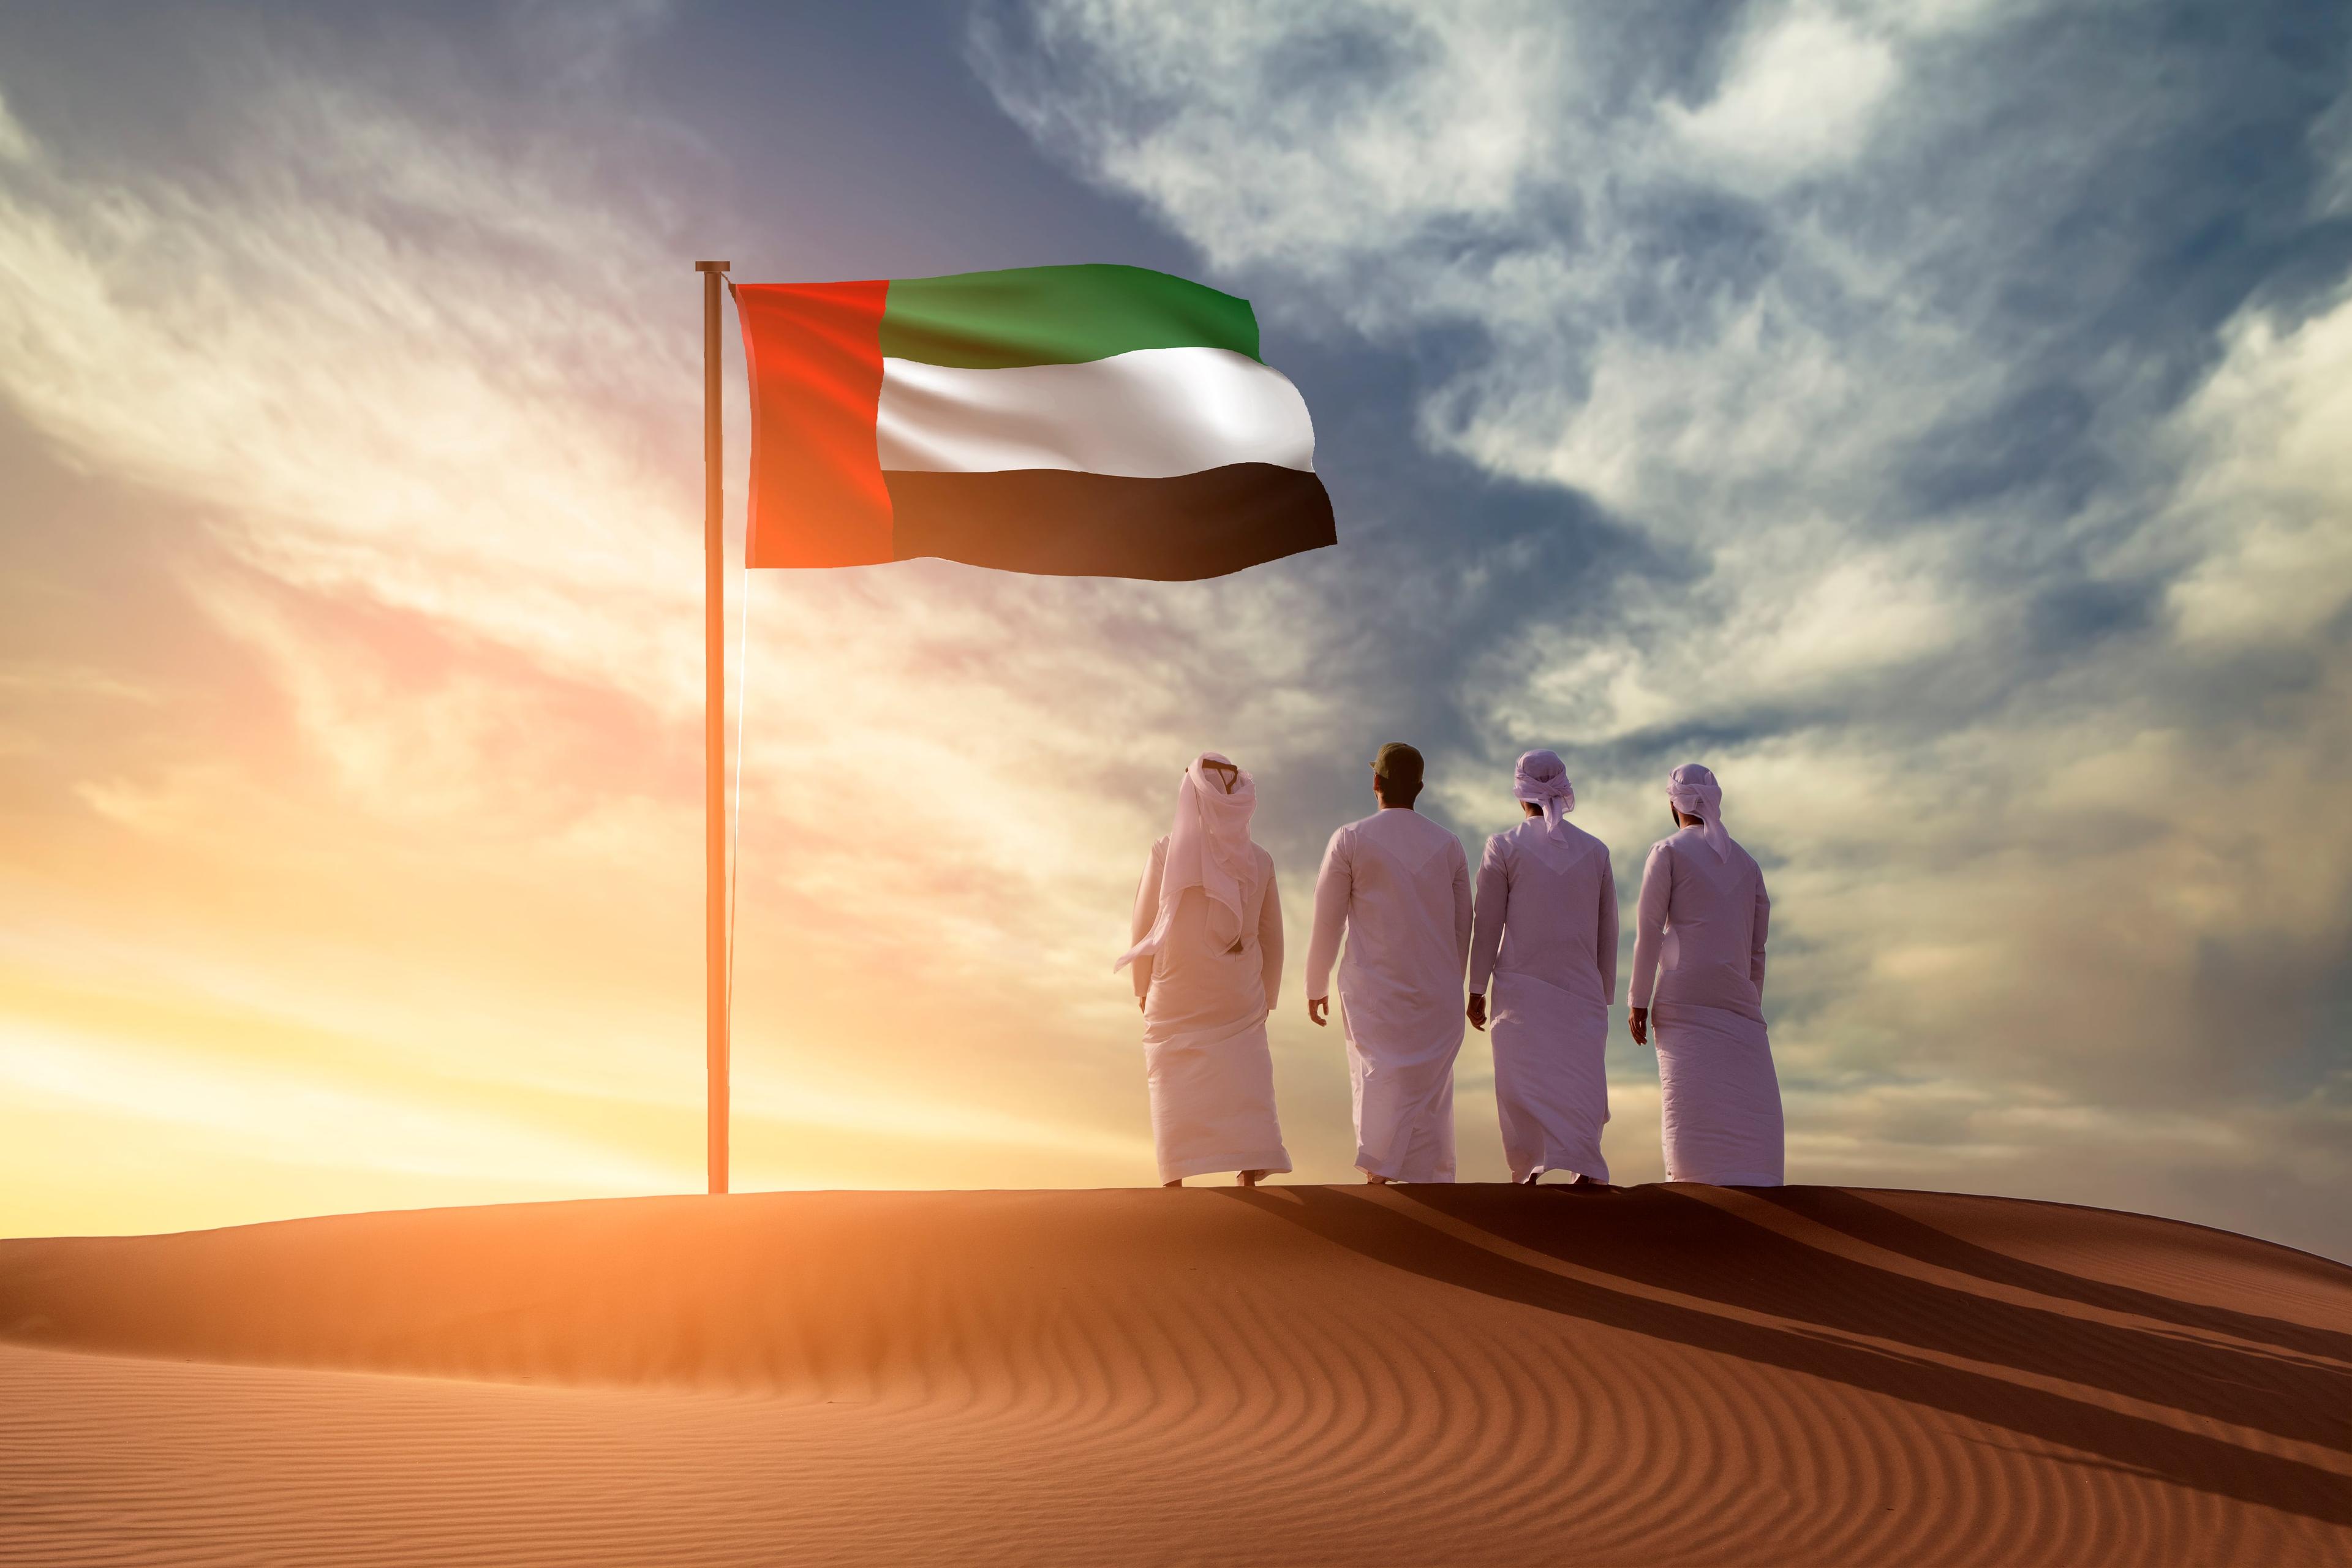 3-DAY PUBLIC HOLIDAY IN THE UAE - CONFIRMED AND COMING SOON!